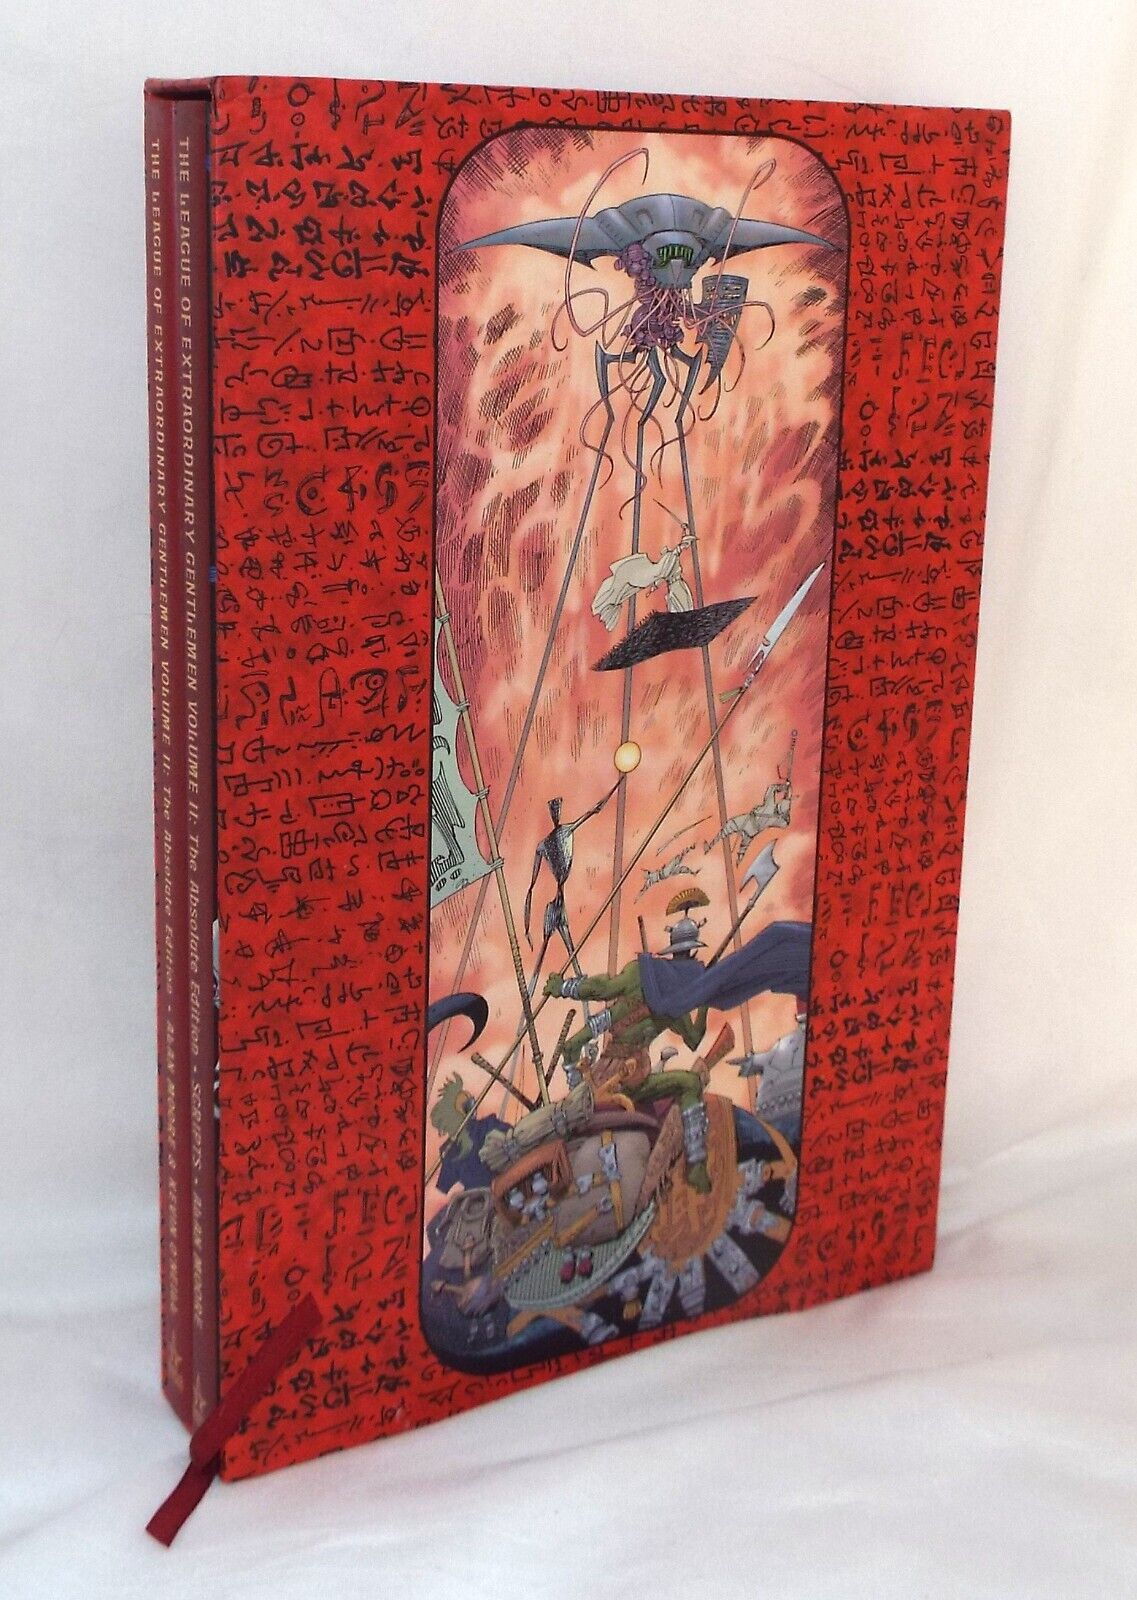 The League of Extraordinary Gentlemen Vol. 2 Absolute Edition RARE OOP